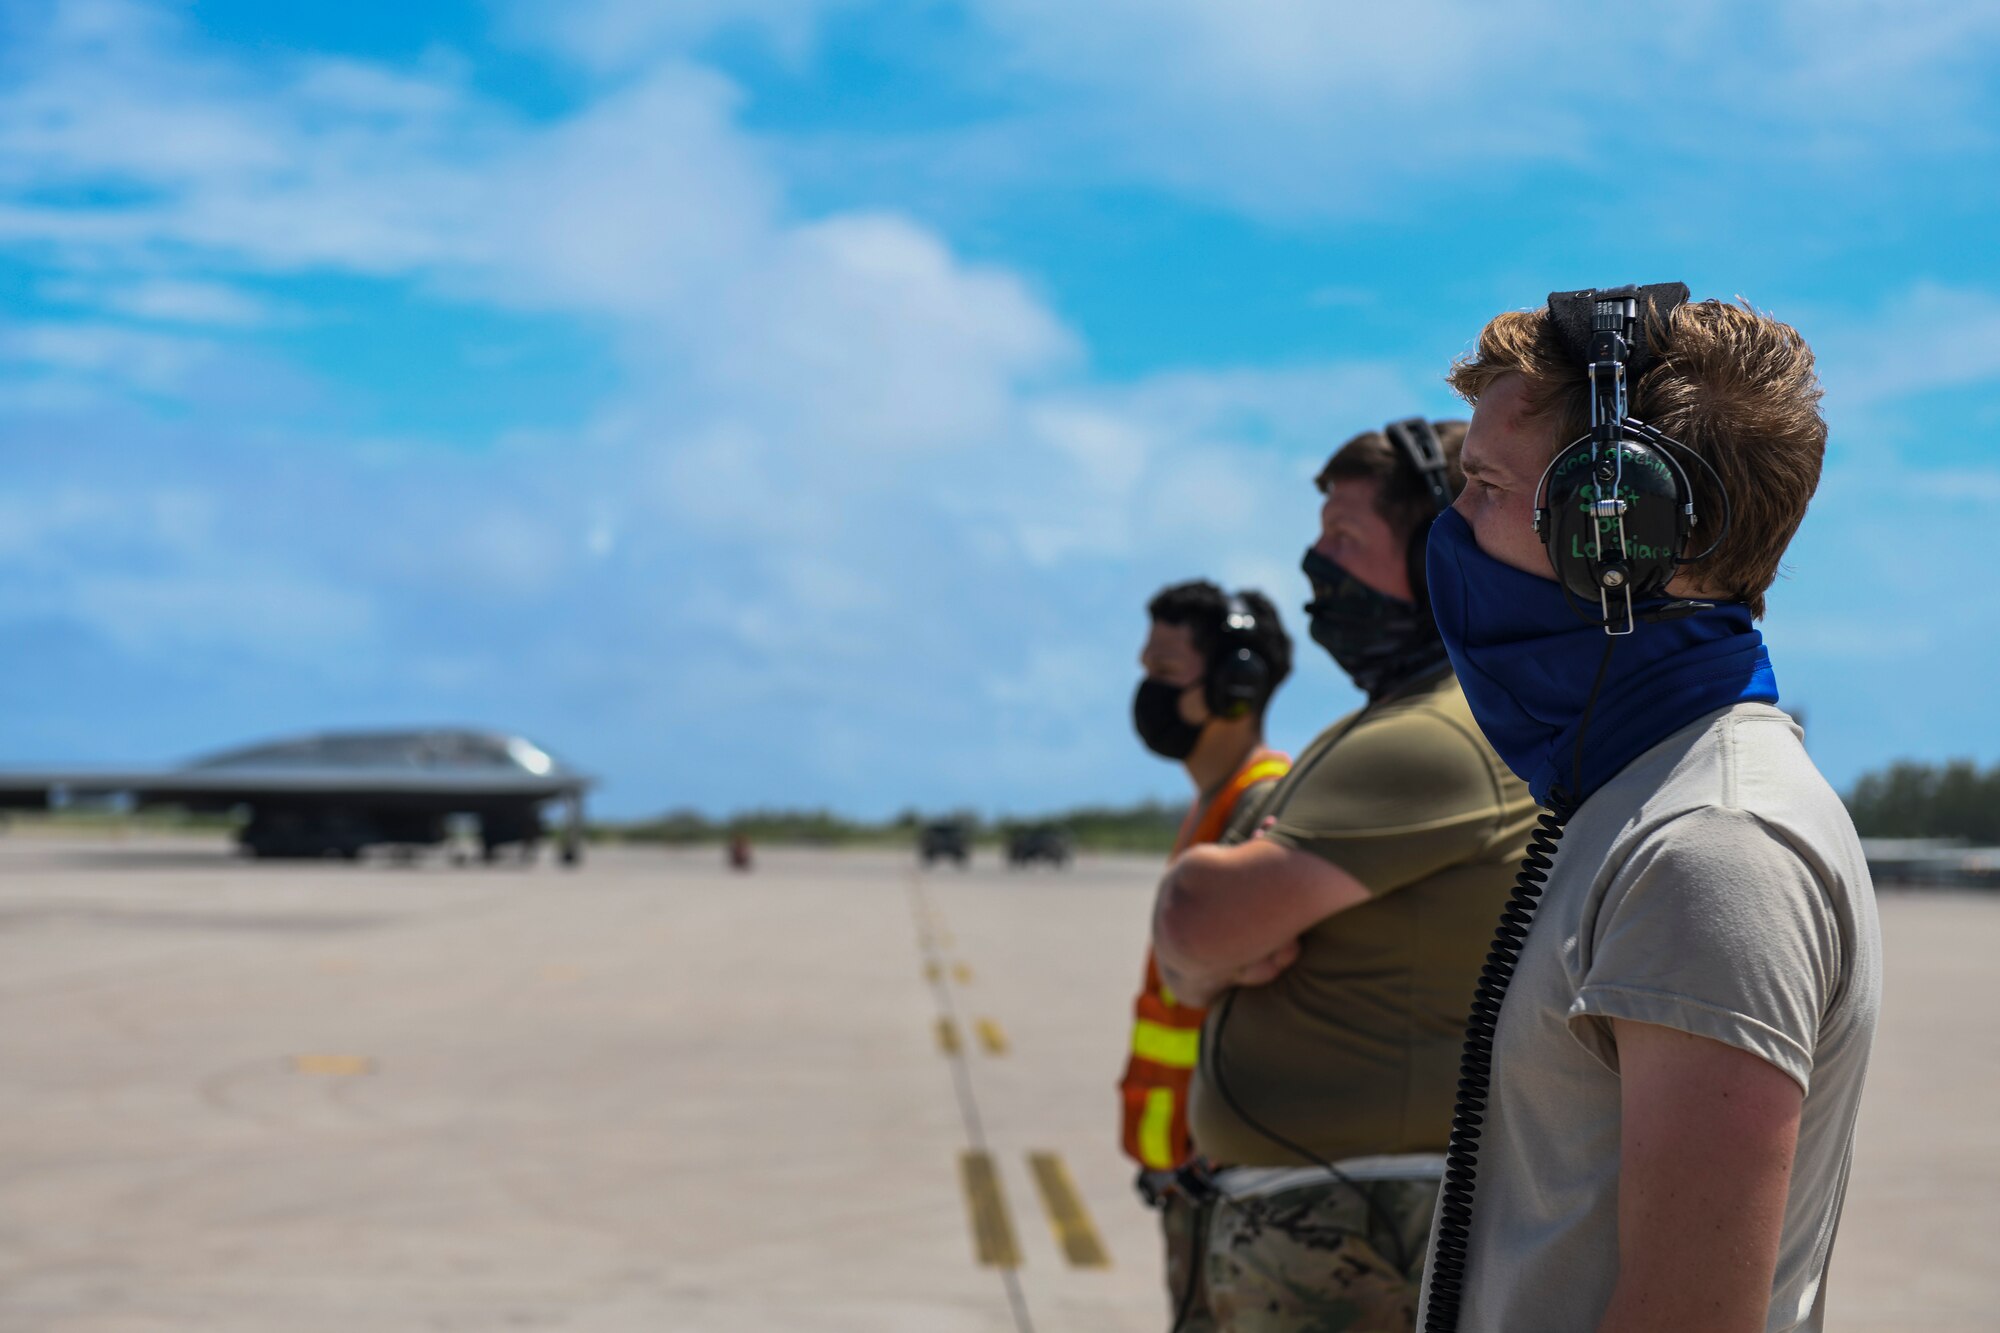 U.S. Air Force Airman 1st Class Samuel Medina, Staff Sgt. Mark Farrar, and Senior Airman Robert Witkowski, maintainers assigned to the 393rd Expeditionary Bomb Squadron, deployed from Whiteman Air Force Base, Missouri, prepare to marshal a B-2 Spirit Stealth Bomber at Naval Support Facility Diego Garcia, to support a bomber task force mission,  Aug. 17, 2020. Due to COVID-19 restrictions, deployed members actively employed social distancing measures and mask wearing in order to continue operating U.S. Strategic Command’s dynamic force employment missions in the Indo-Pacific. (U.S. Air Force photo by Tech. Sgt. Heather Salazar)